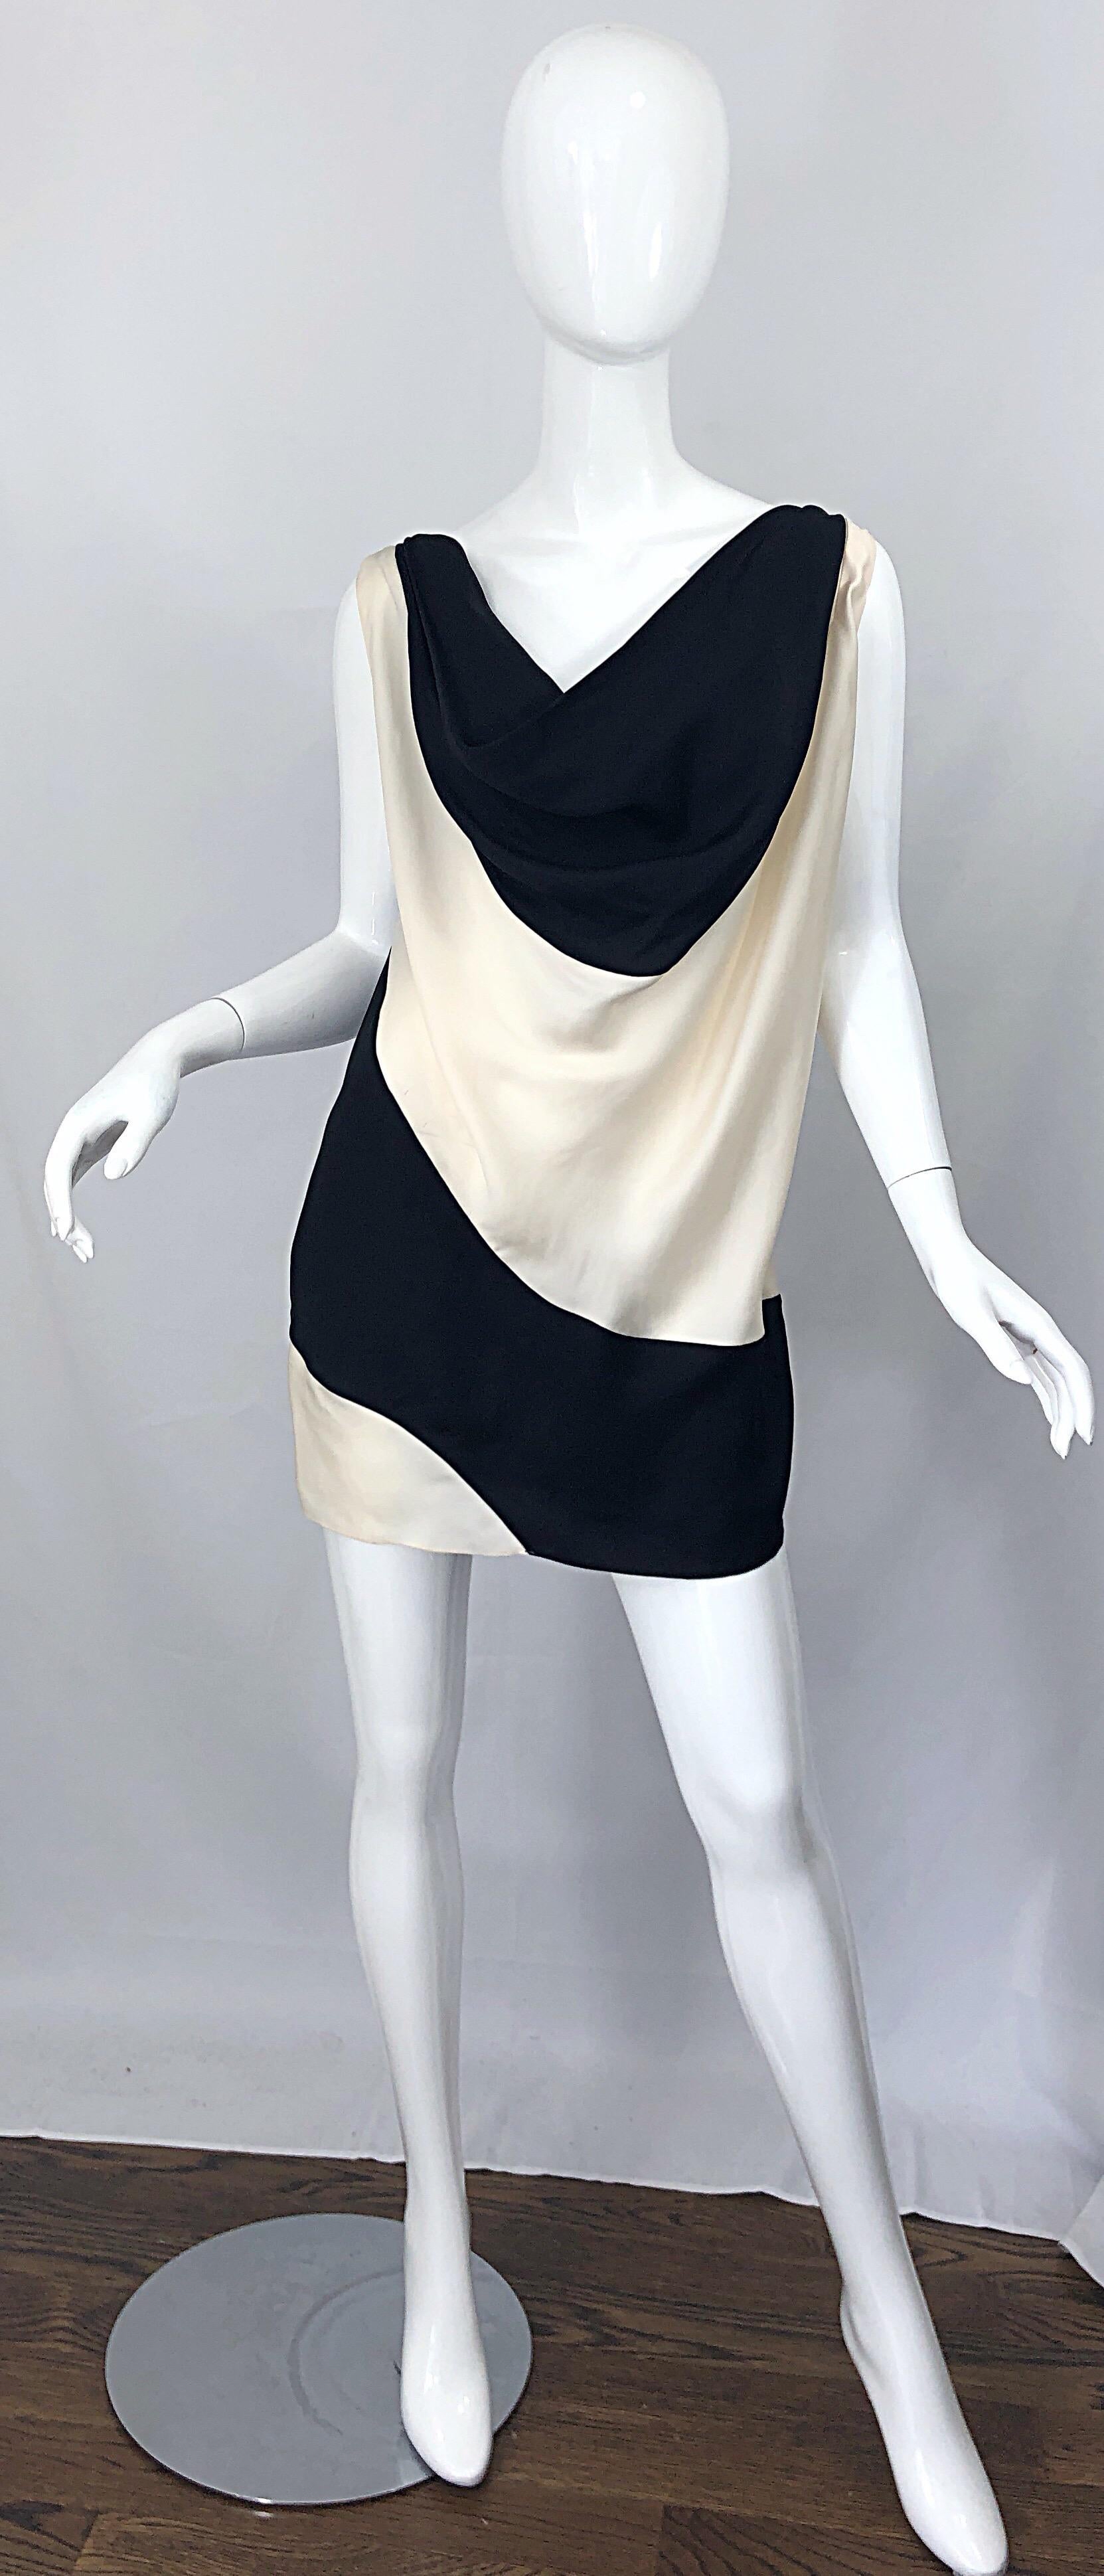 Sensational brand new vintage deadstock 1990s  with original tags $1,700 DONNA KARAN Collection black and white / ivory color block luxurious soft cupro tunic top / mini dress! Cupro is a rare fabric only used for the finest of designers, especially